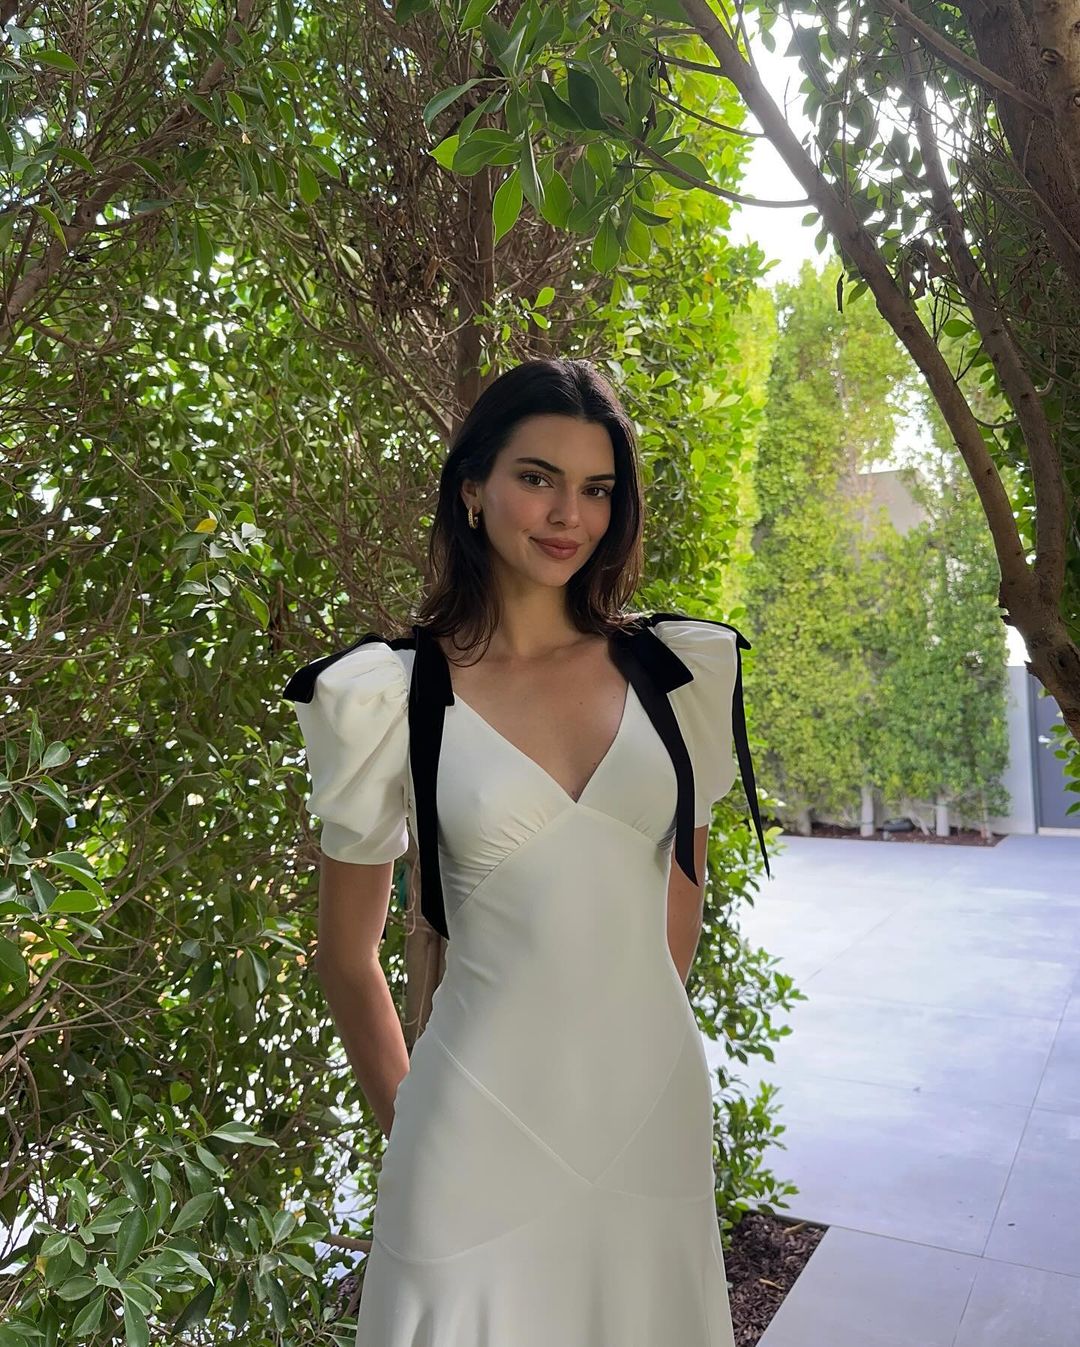 Kendall Jenner wears a white dress with black bows.